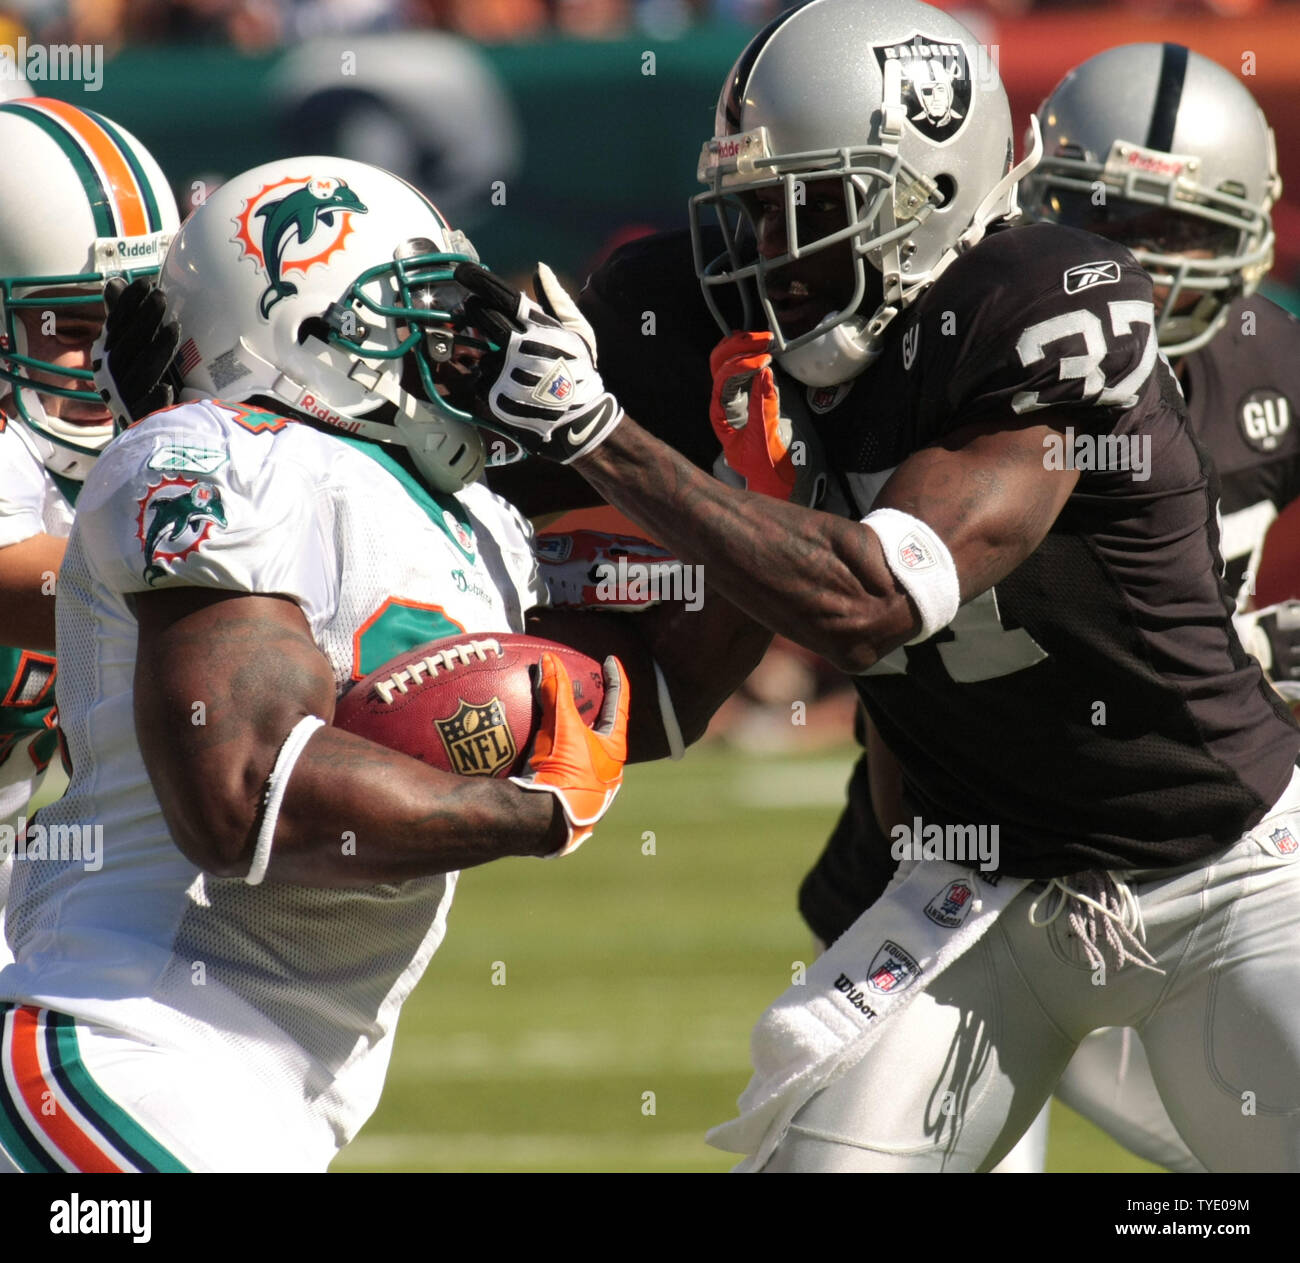 raiders against the dolphins